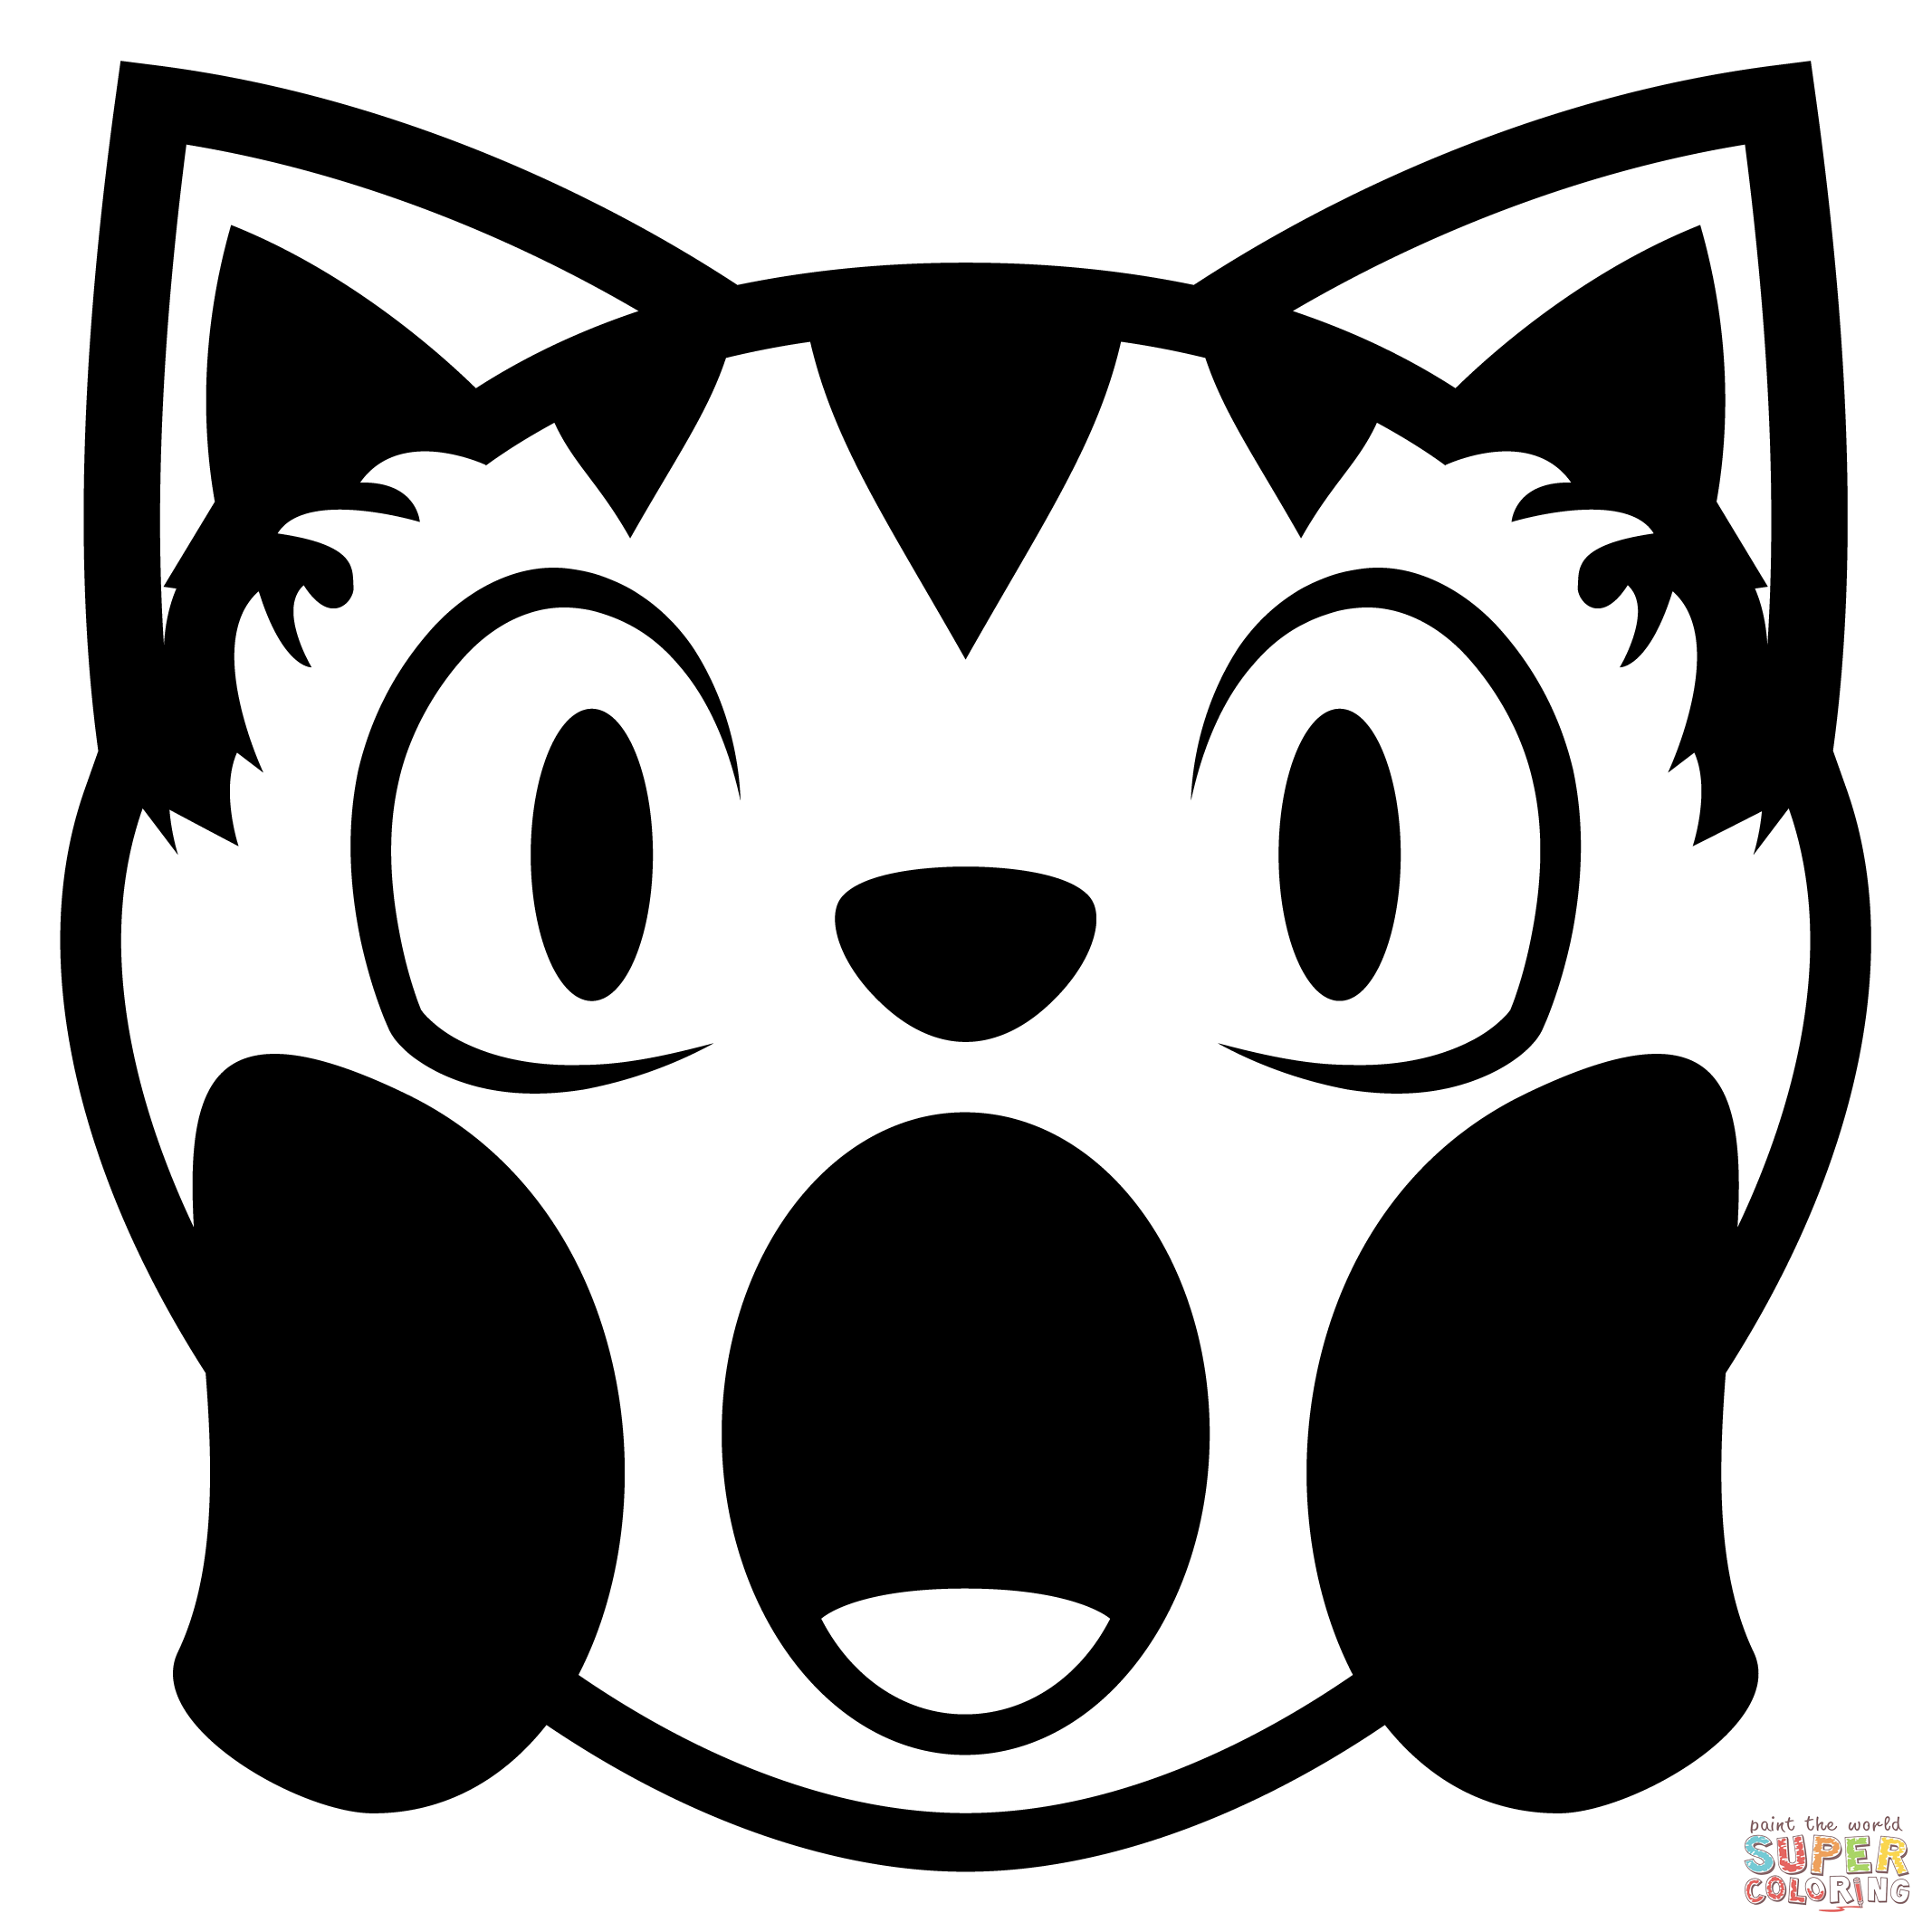 Weary cat emoji coloring page free printable coloring pages